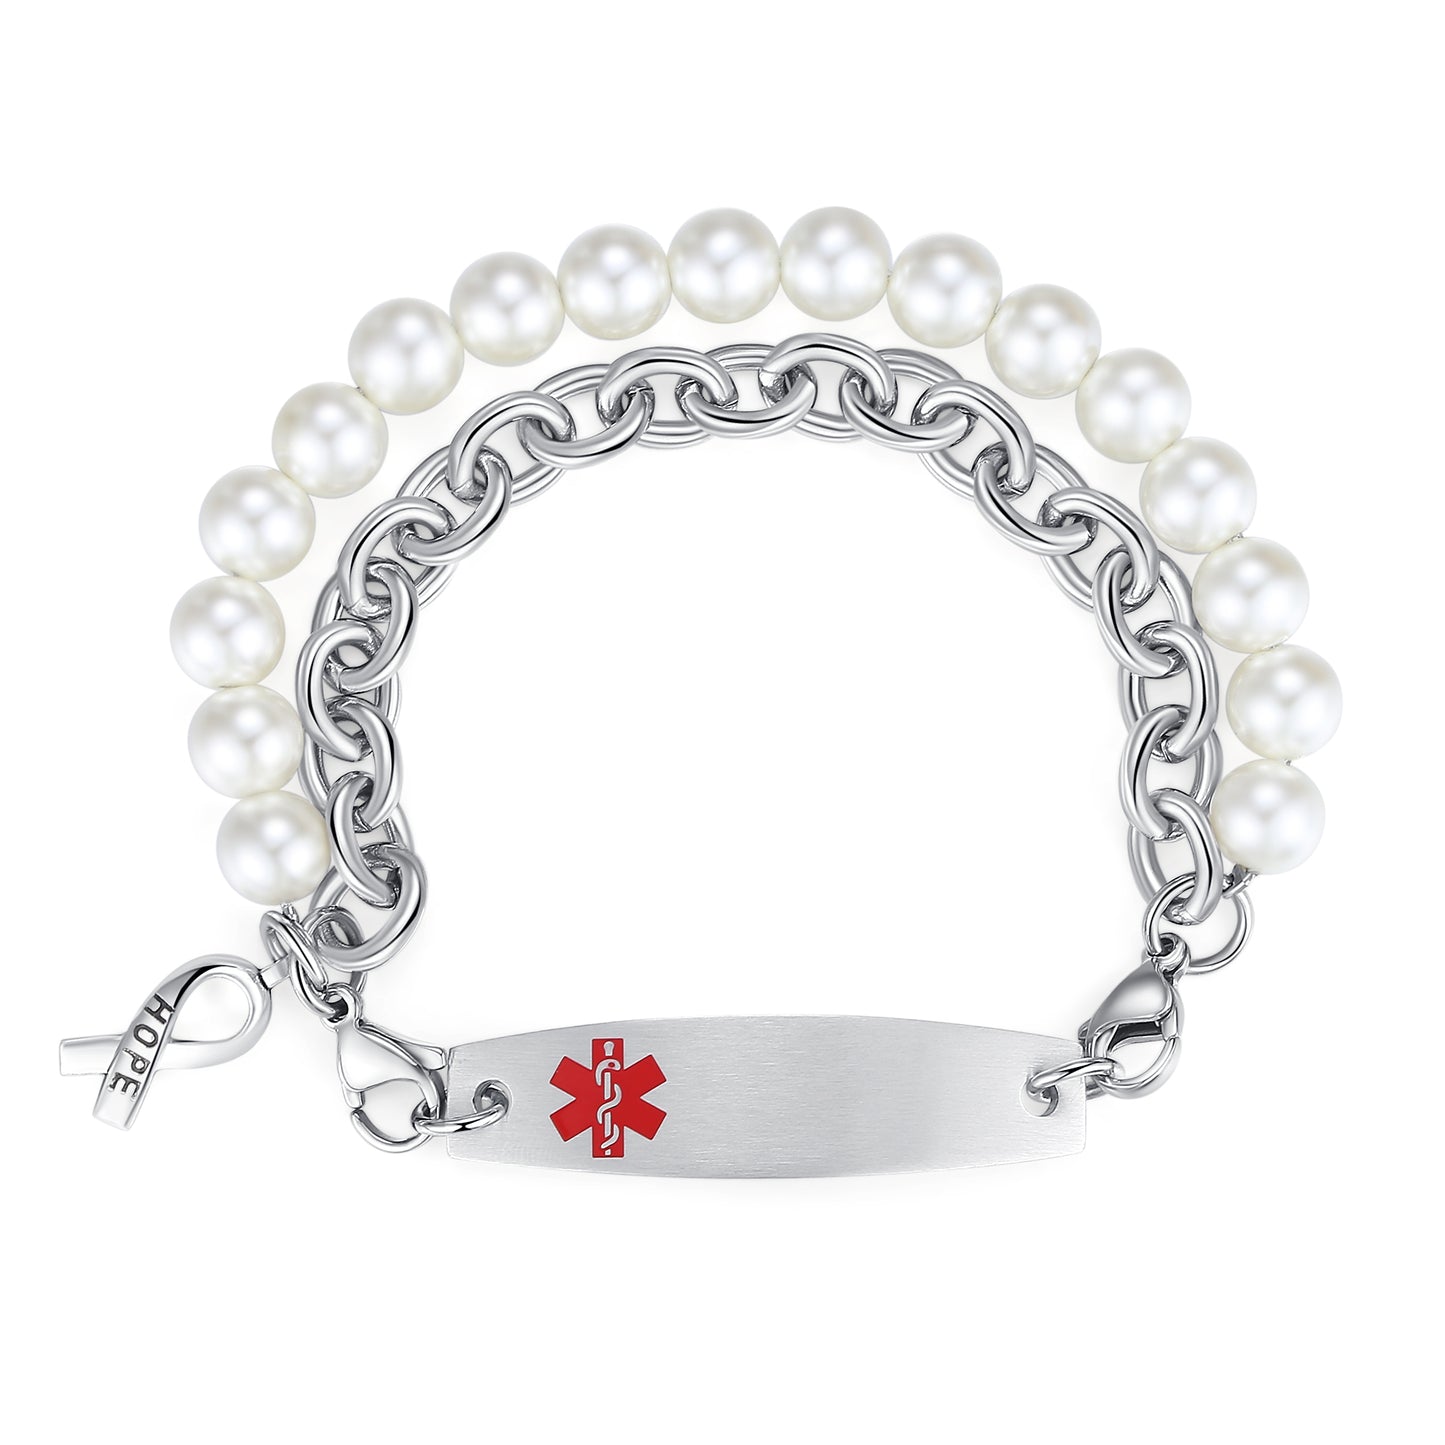 LinnaLove Interchangeable Medical Alert Bracelets for Men Women Stainless steel Cable Chain with beads bracelets-customize engraving